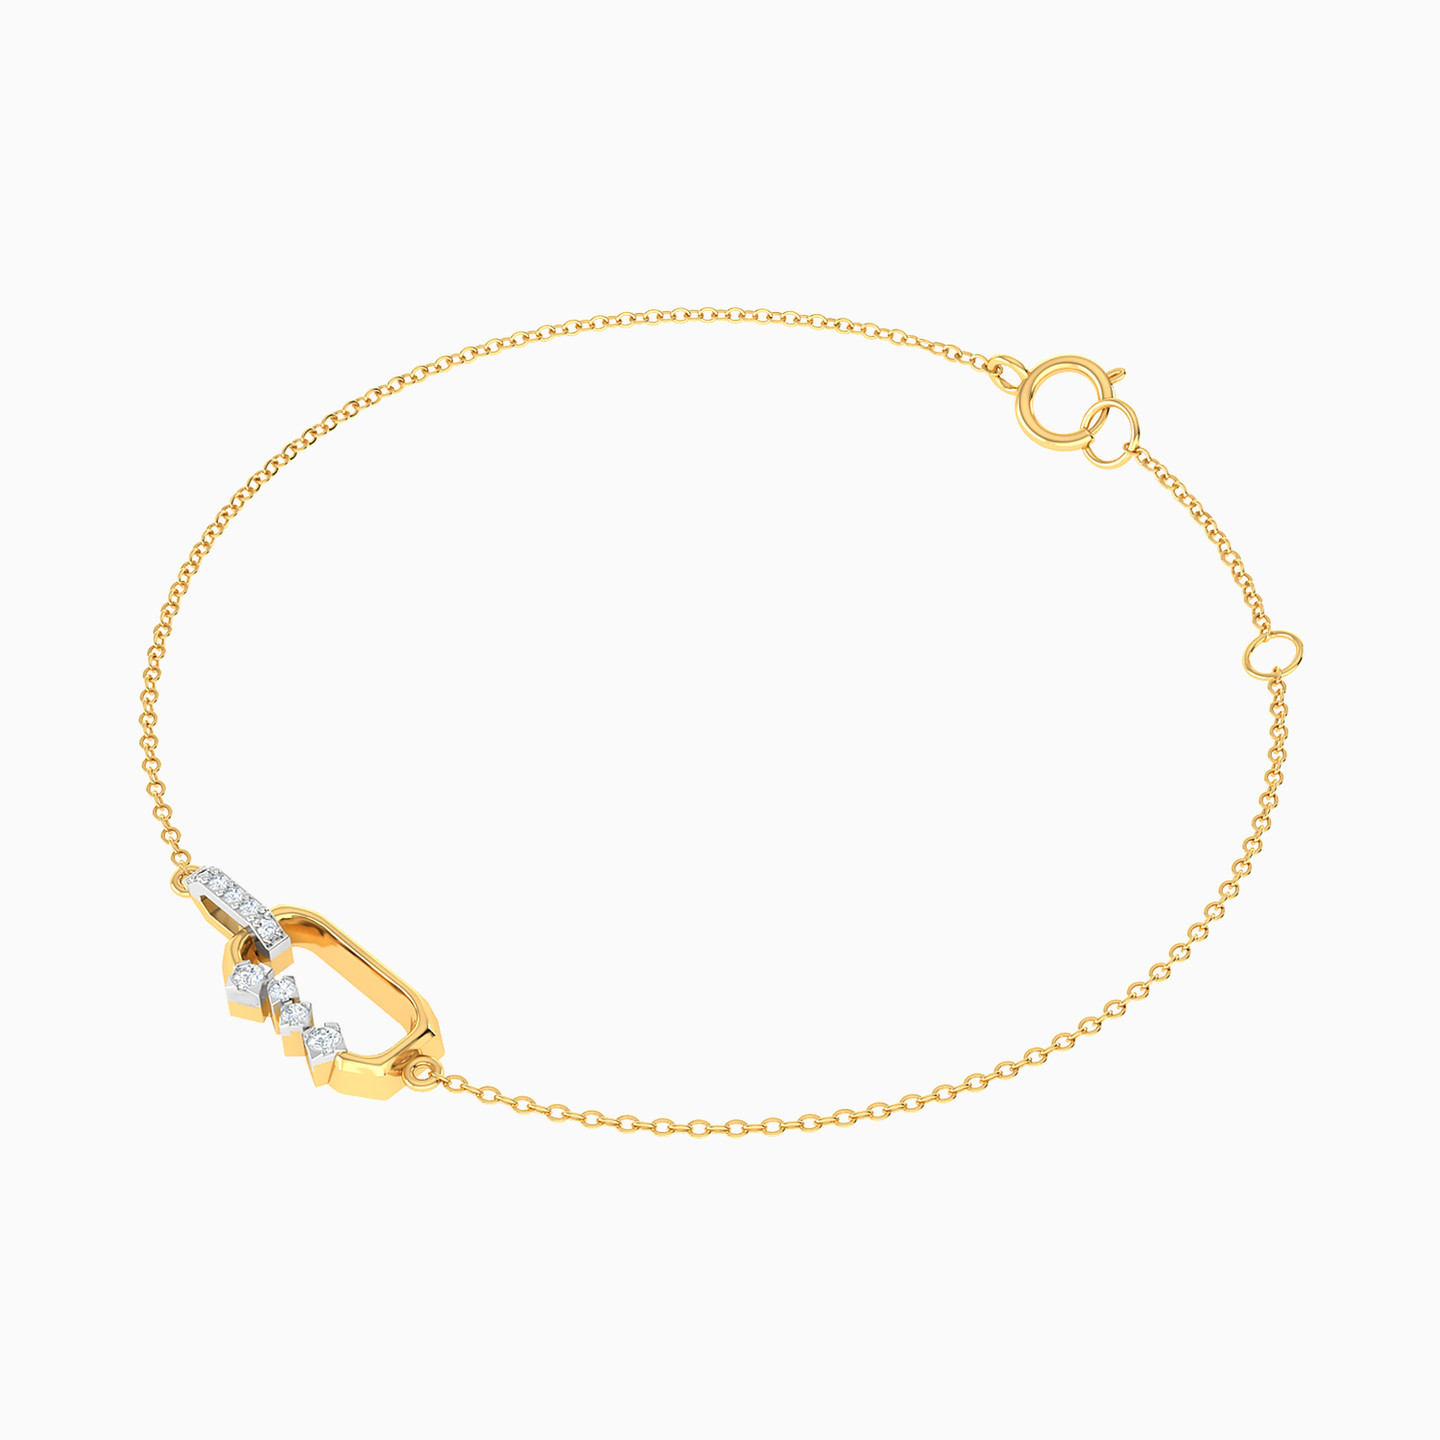 Rectangle Shaped Cubic Zirconia Chain Bracelet in 18K Gold - 2